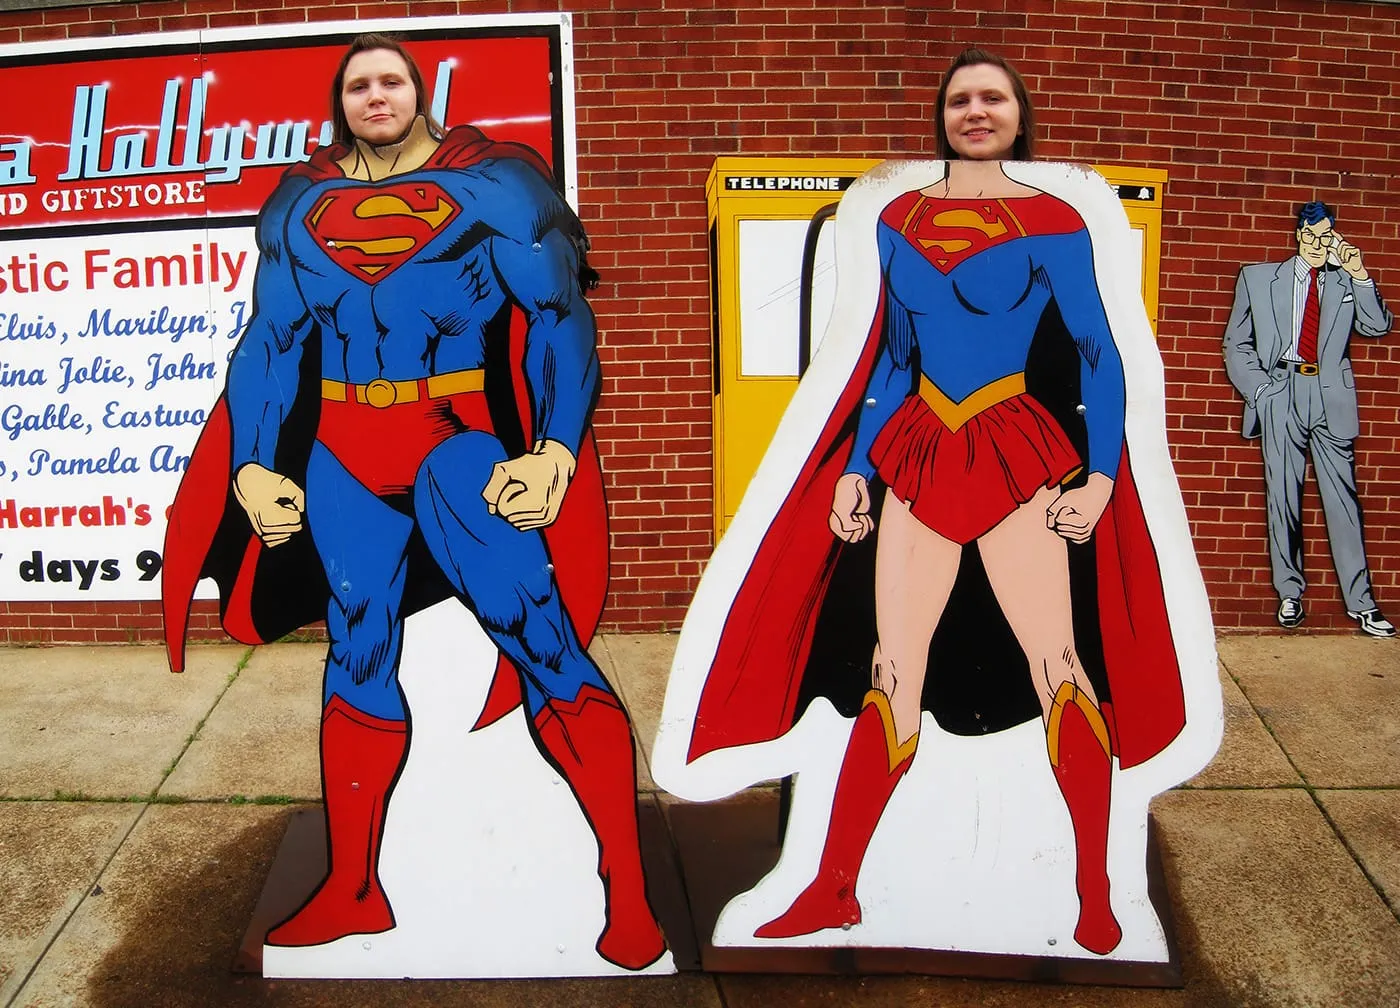 Superman and Supergirl photo ops outside of the Super Museum in Metropolis, Illinois.